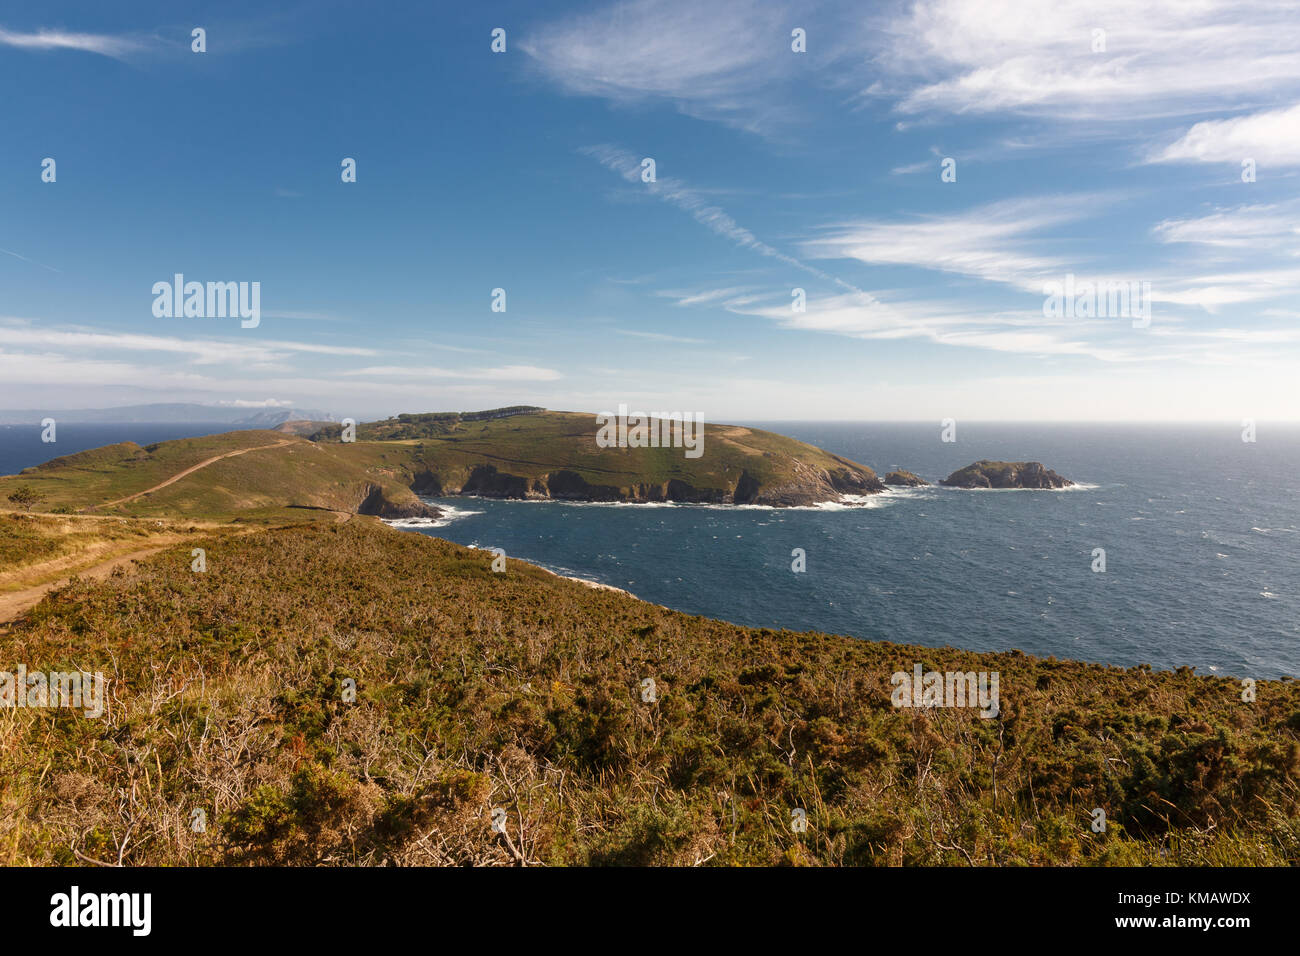 Ons island view from high point, Atlantic Islands National Park, Pontevedra, Galicia, Spain Stock Photo